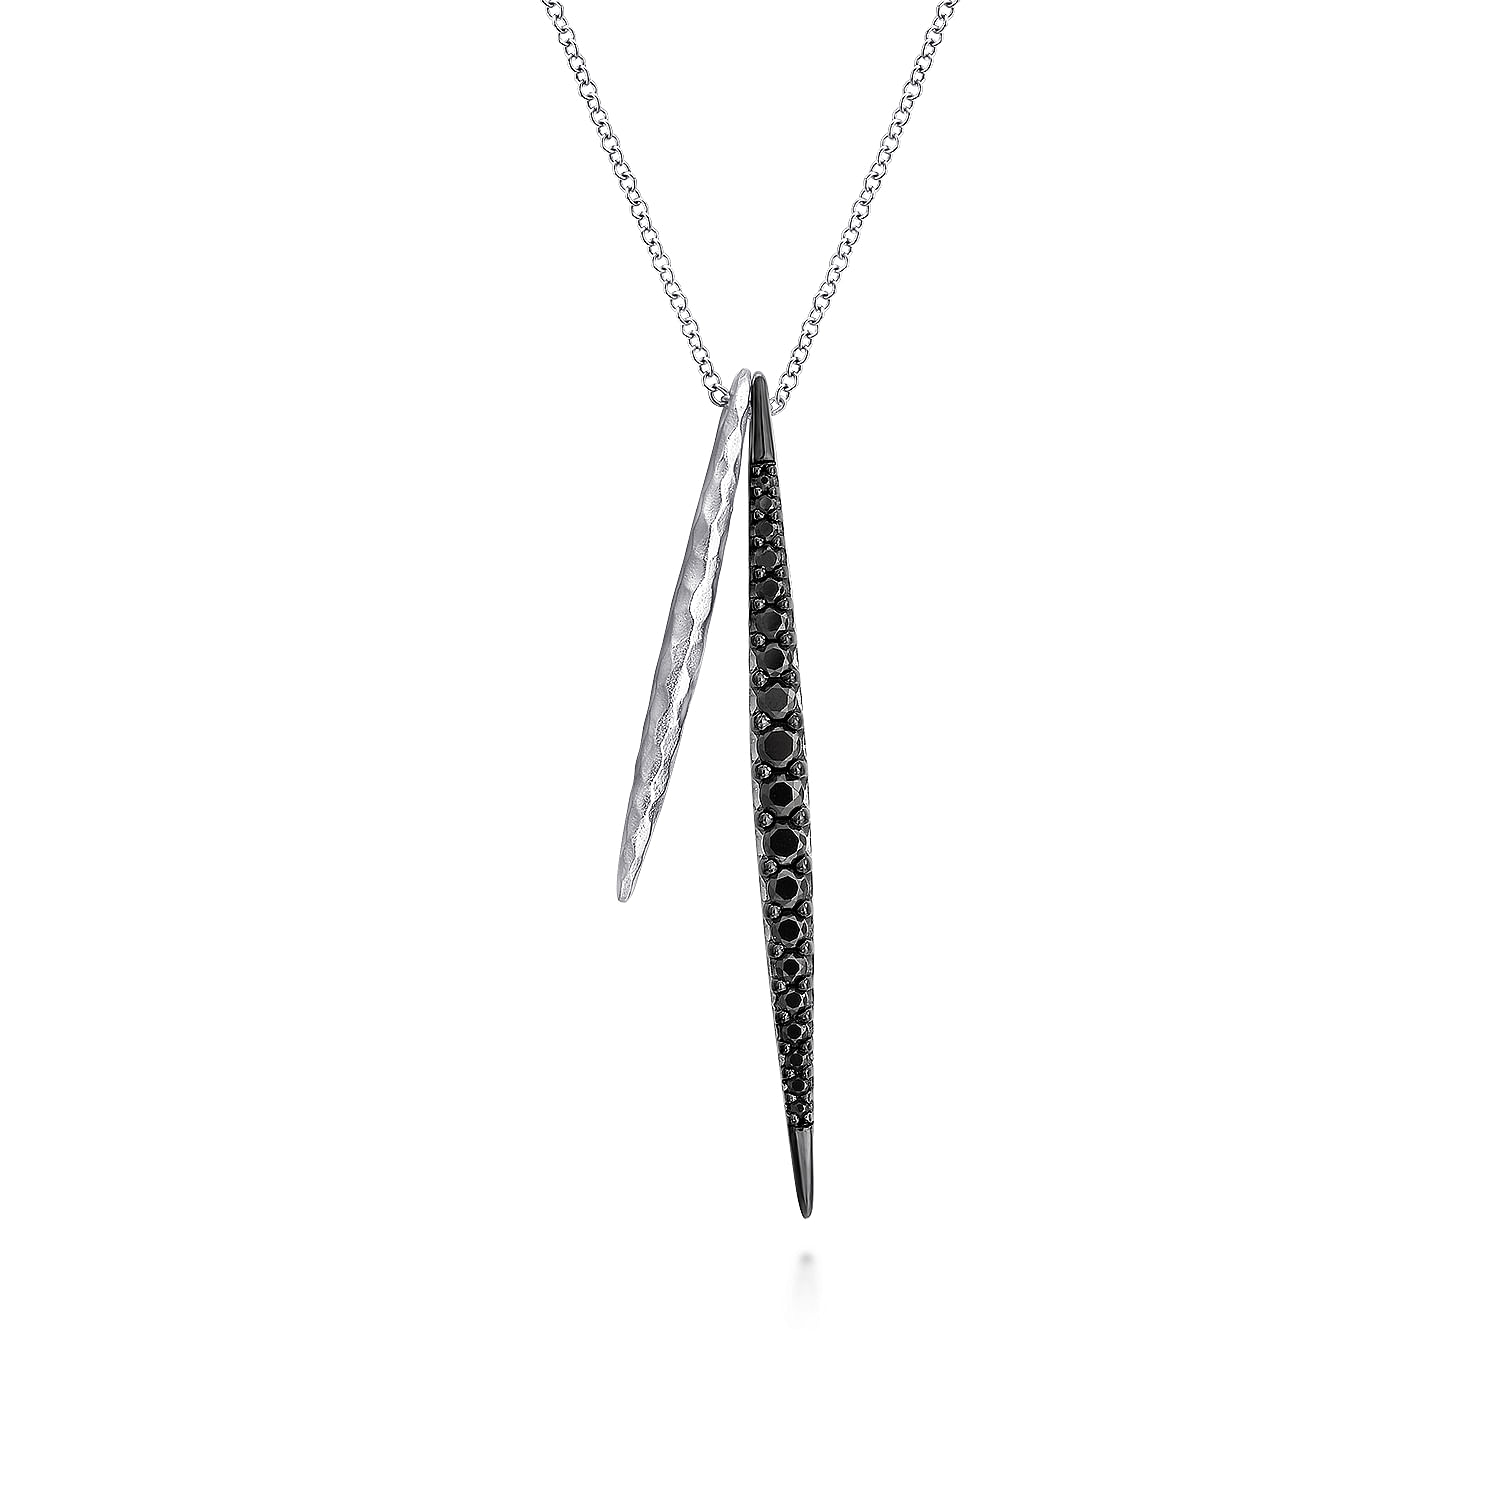 Gabriel - 25 inch Hammered 925 Sterling Silver and Black Spinel Double Spear Necklace